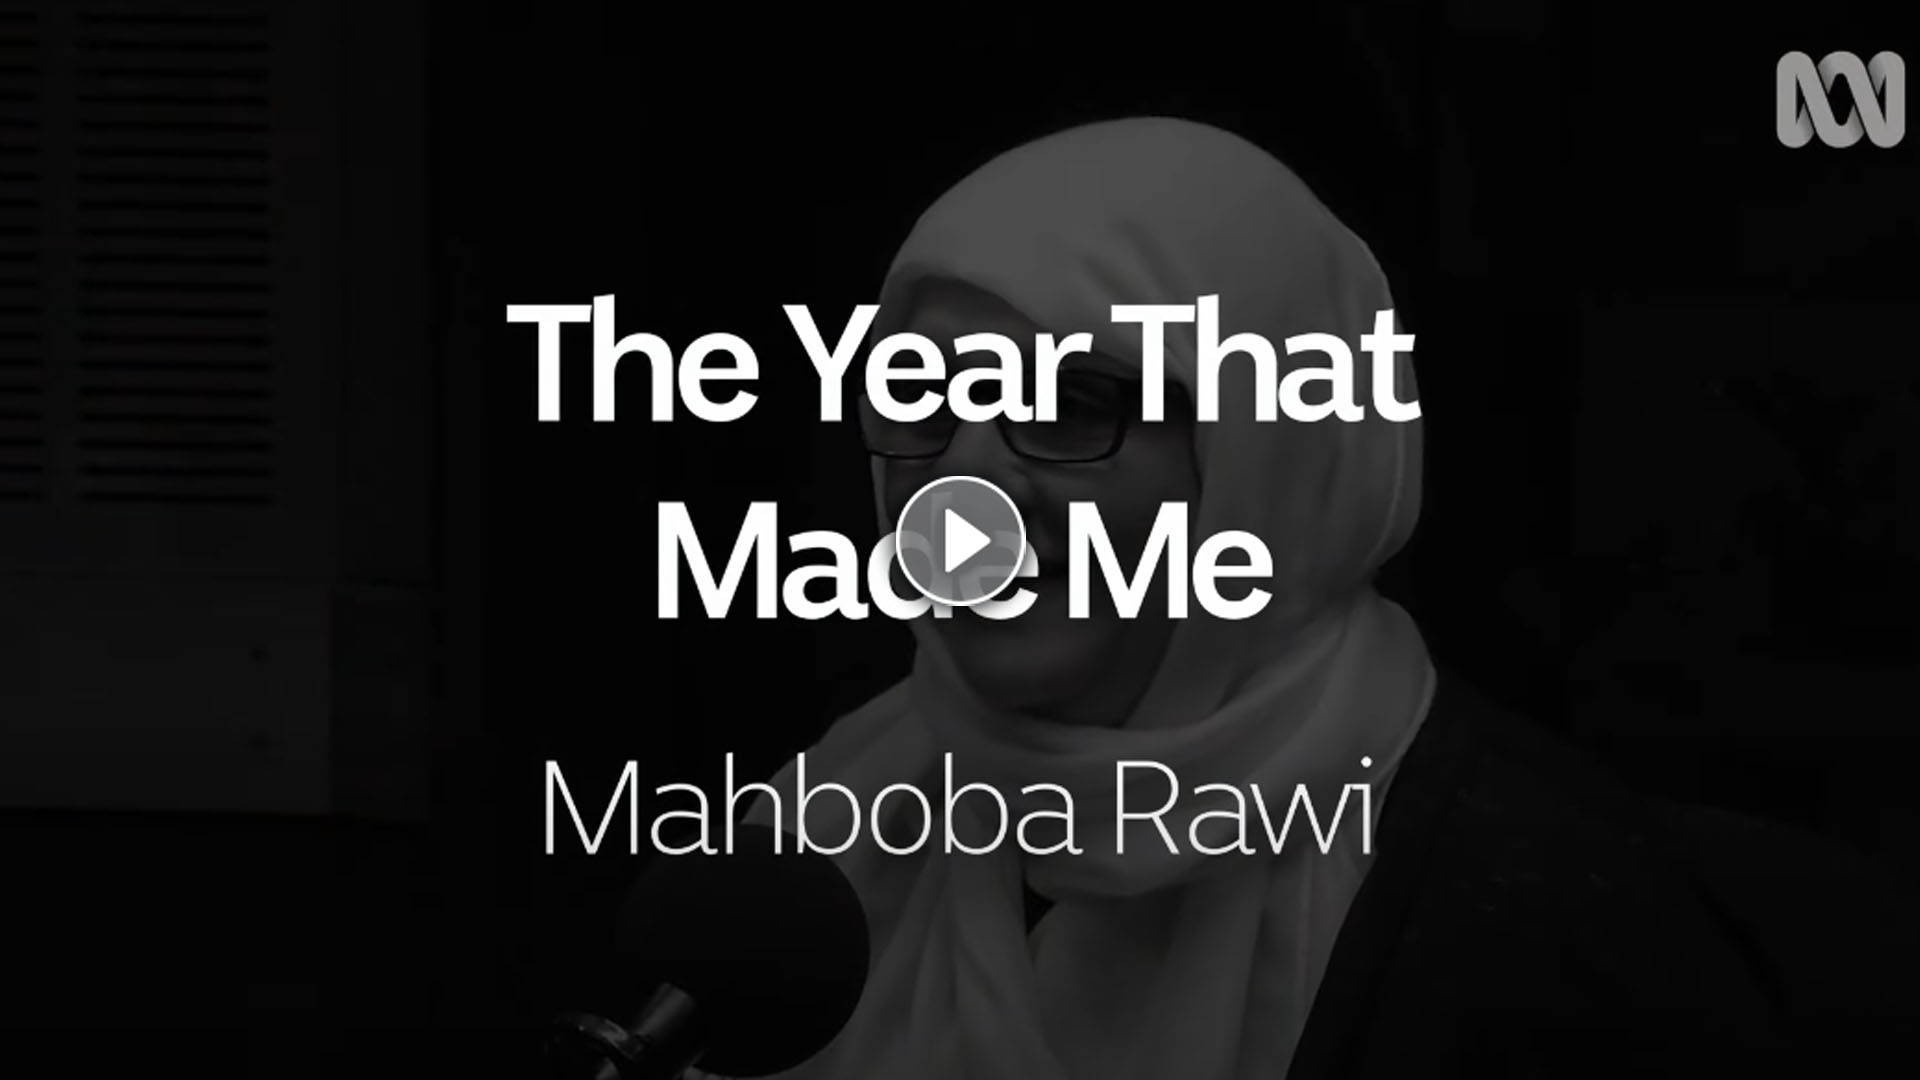 The tragedy behind Mahboba Rawi’s promise – the year that made me | Radio National – Poster Frame